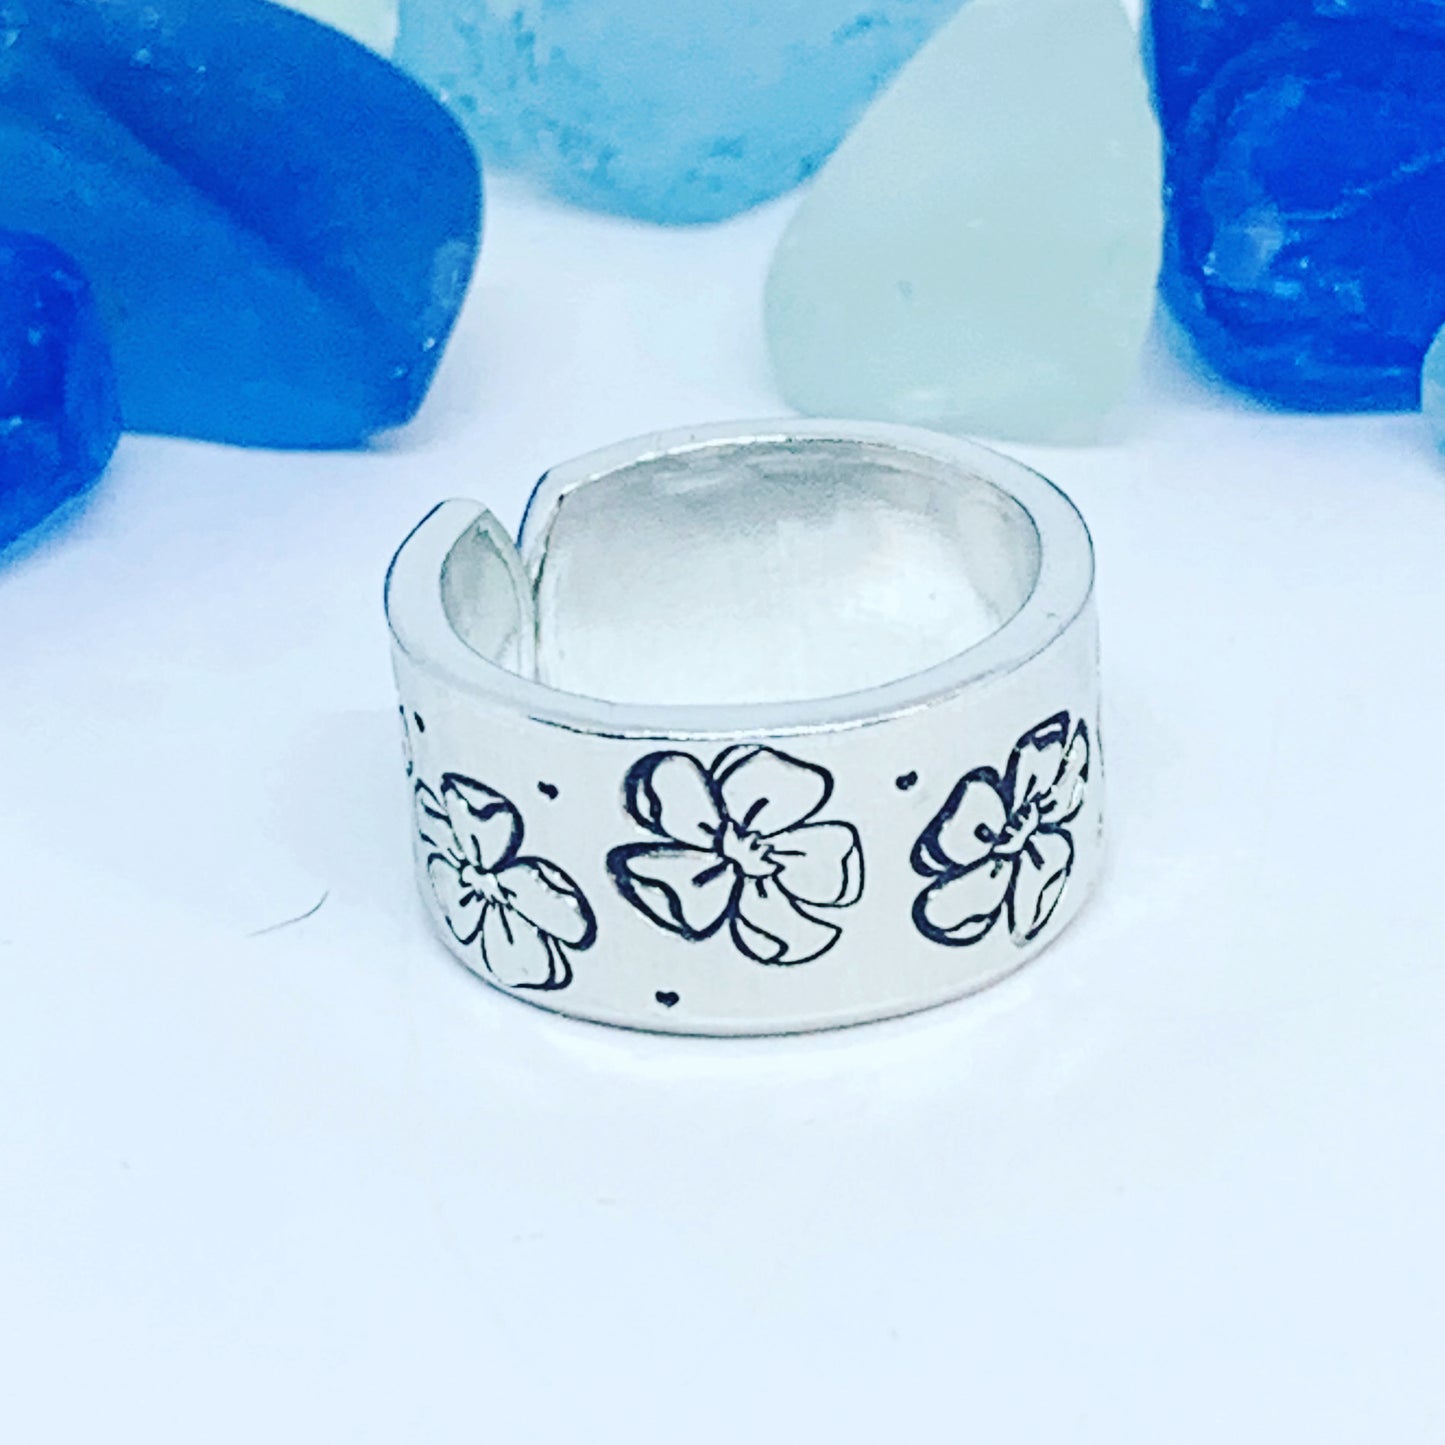 Cosmos Flowers Hand Stamped Ring | October Birth Flower Ring | Stamped Metal Cuff Ring | Adjustable Ring with Flowers | Gift for Her